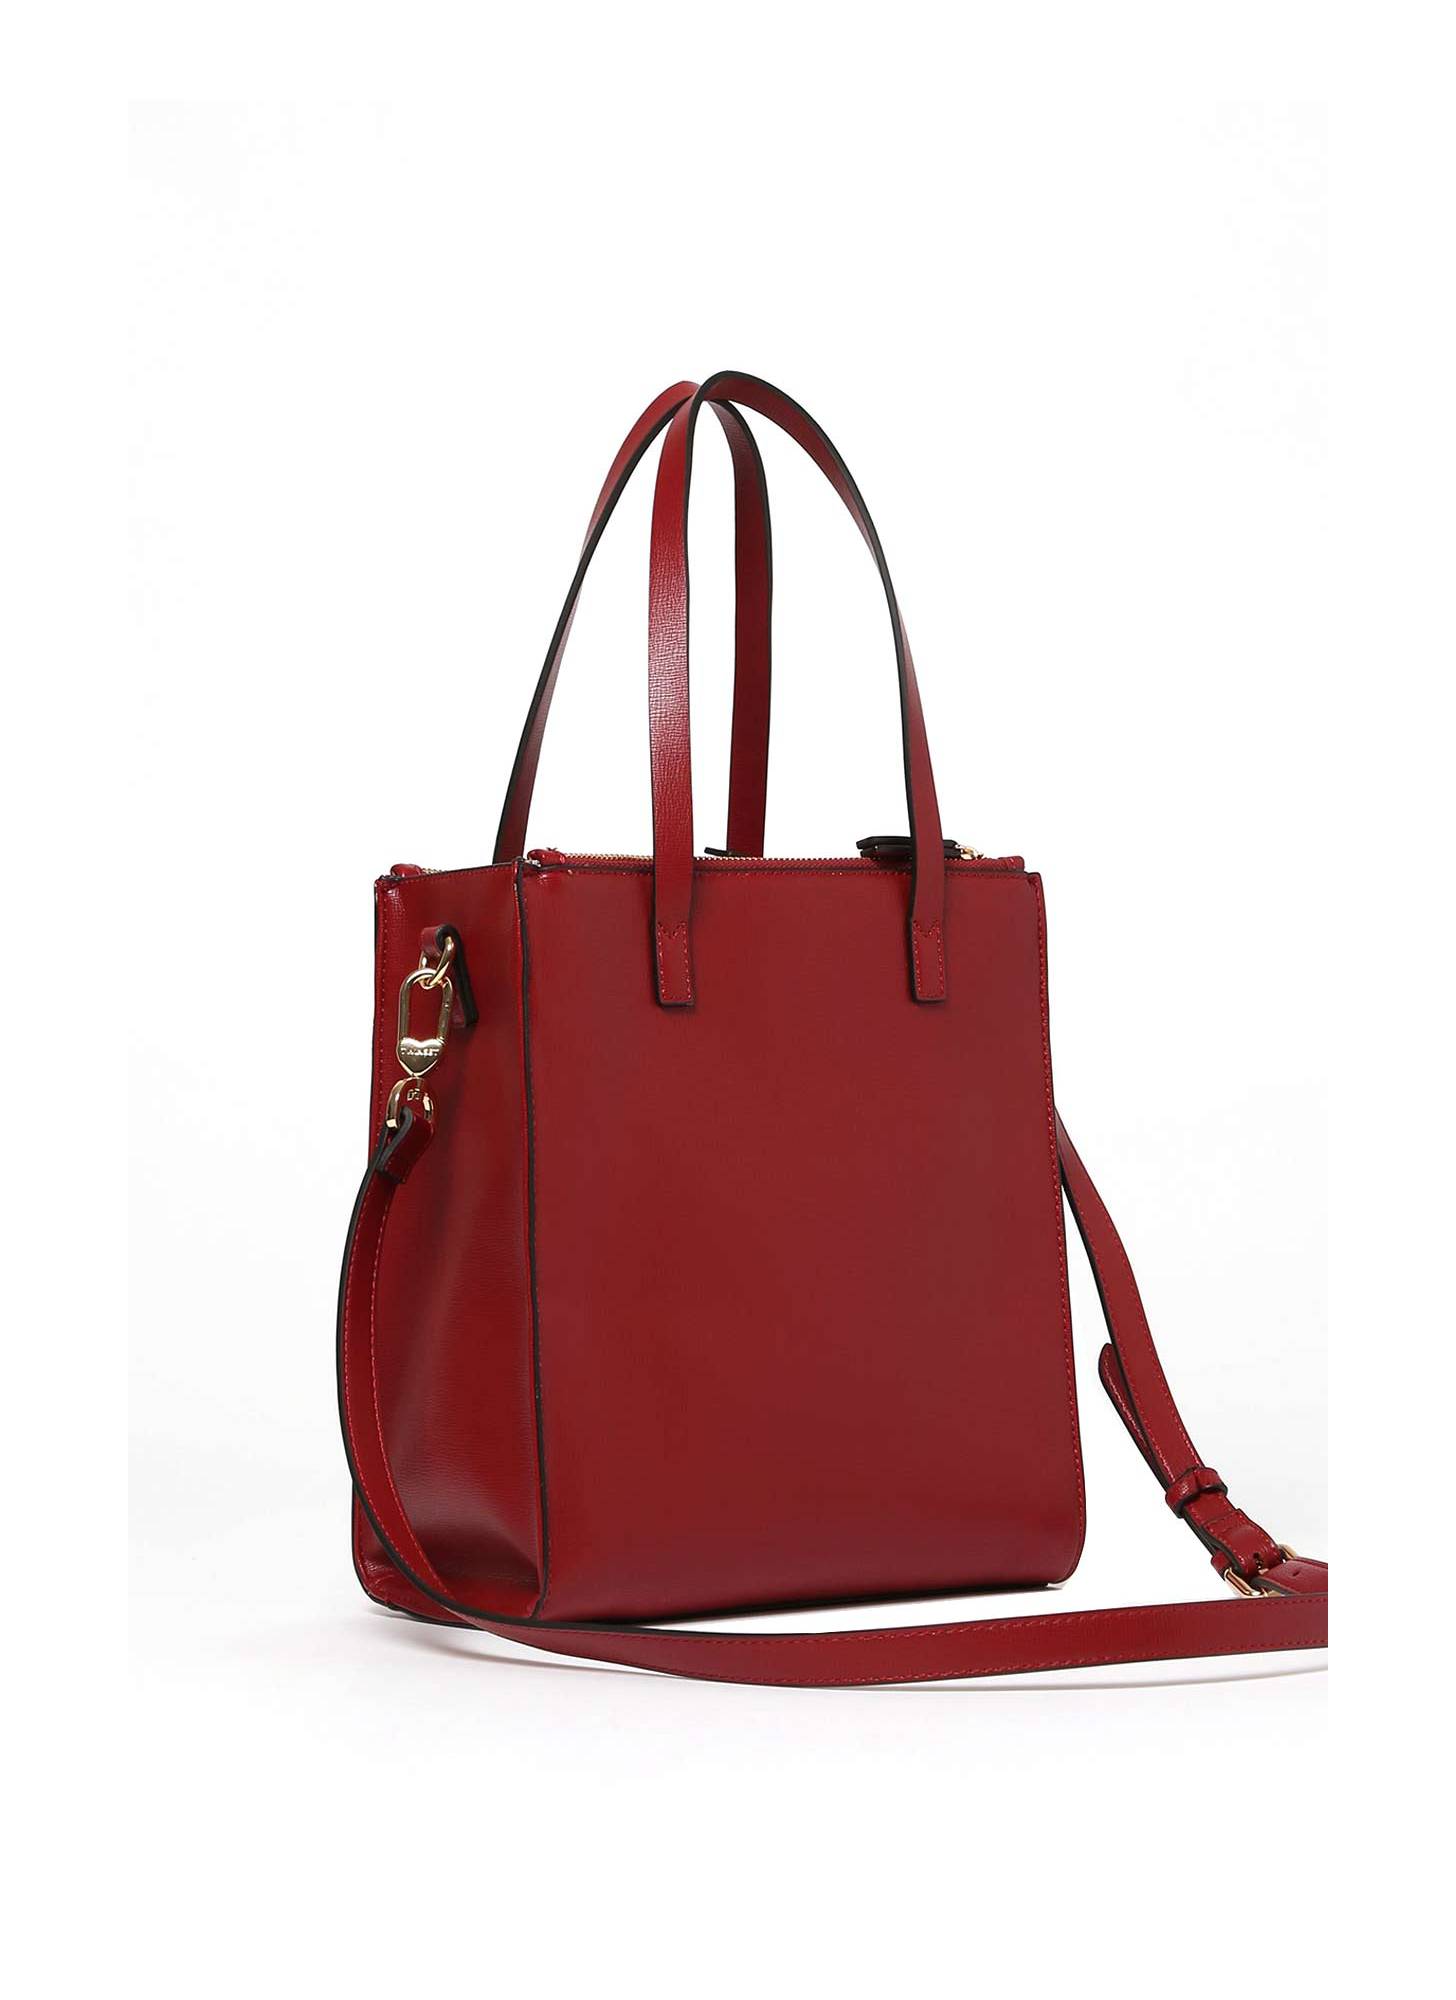 Womens Bags Tote bags MY TWIN Twinset Synthetic Handbag in Red 